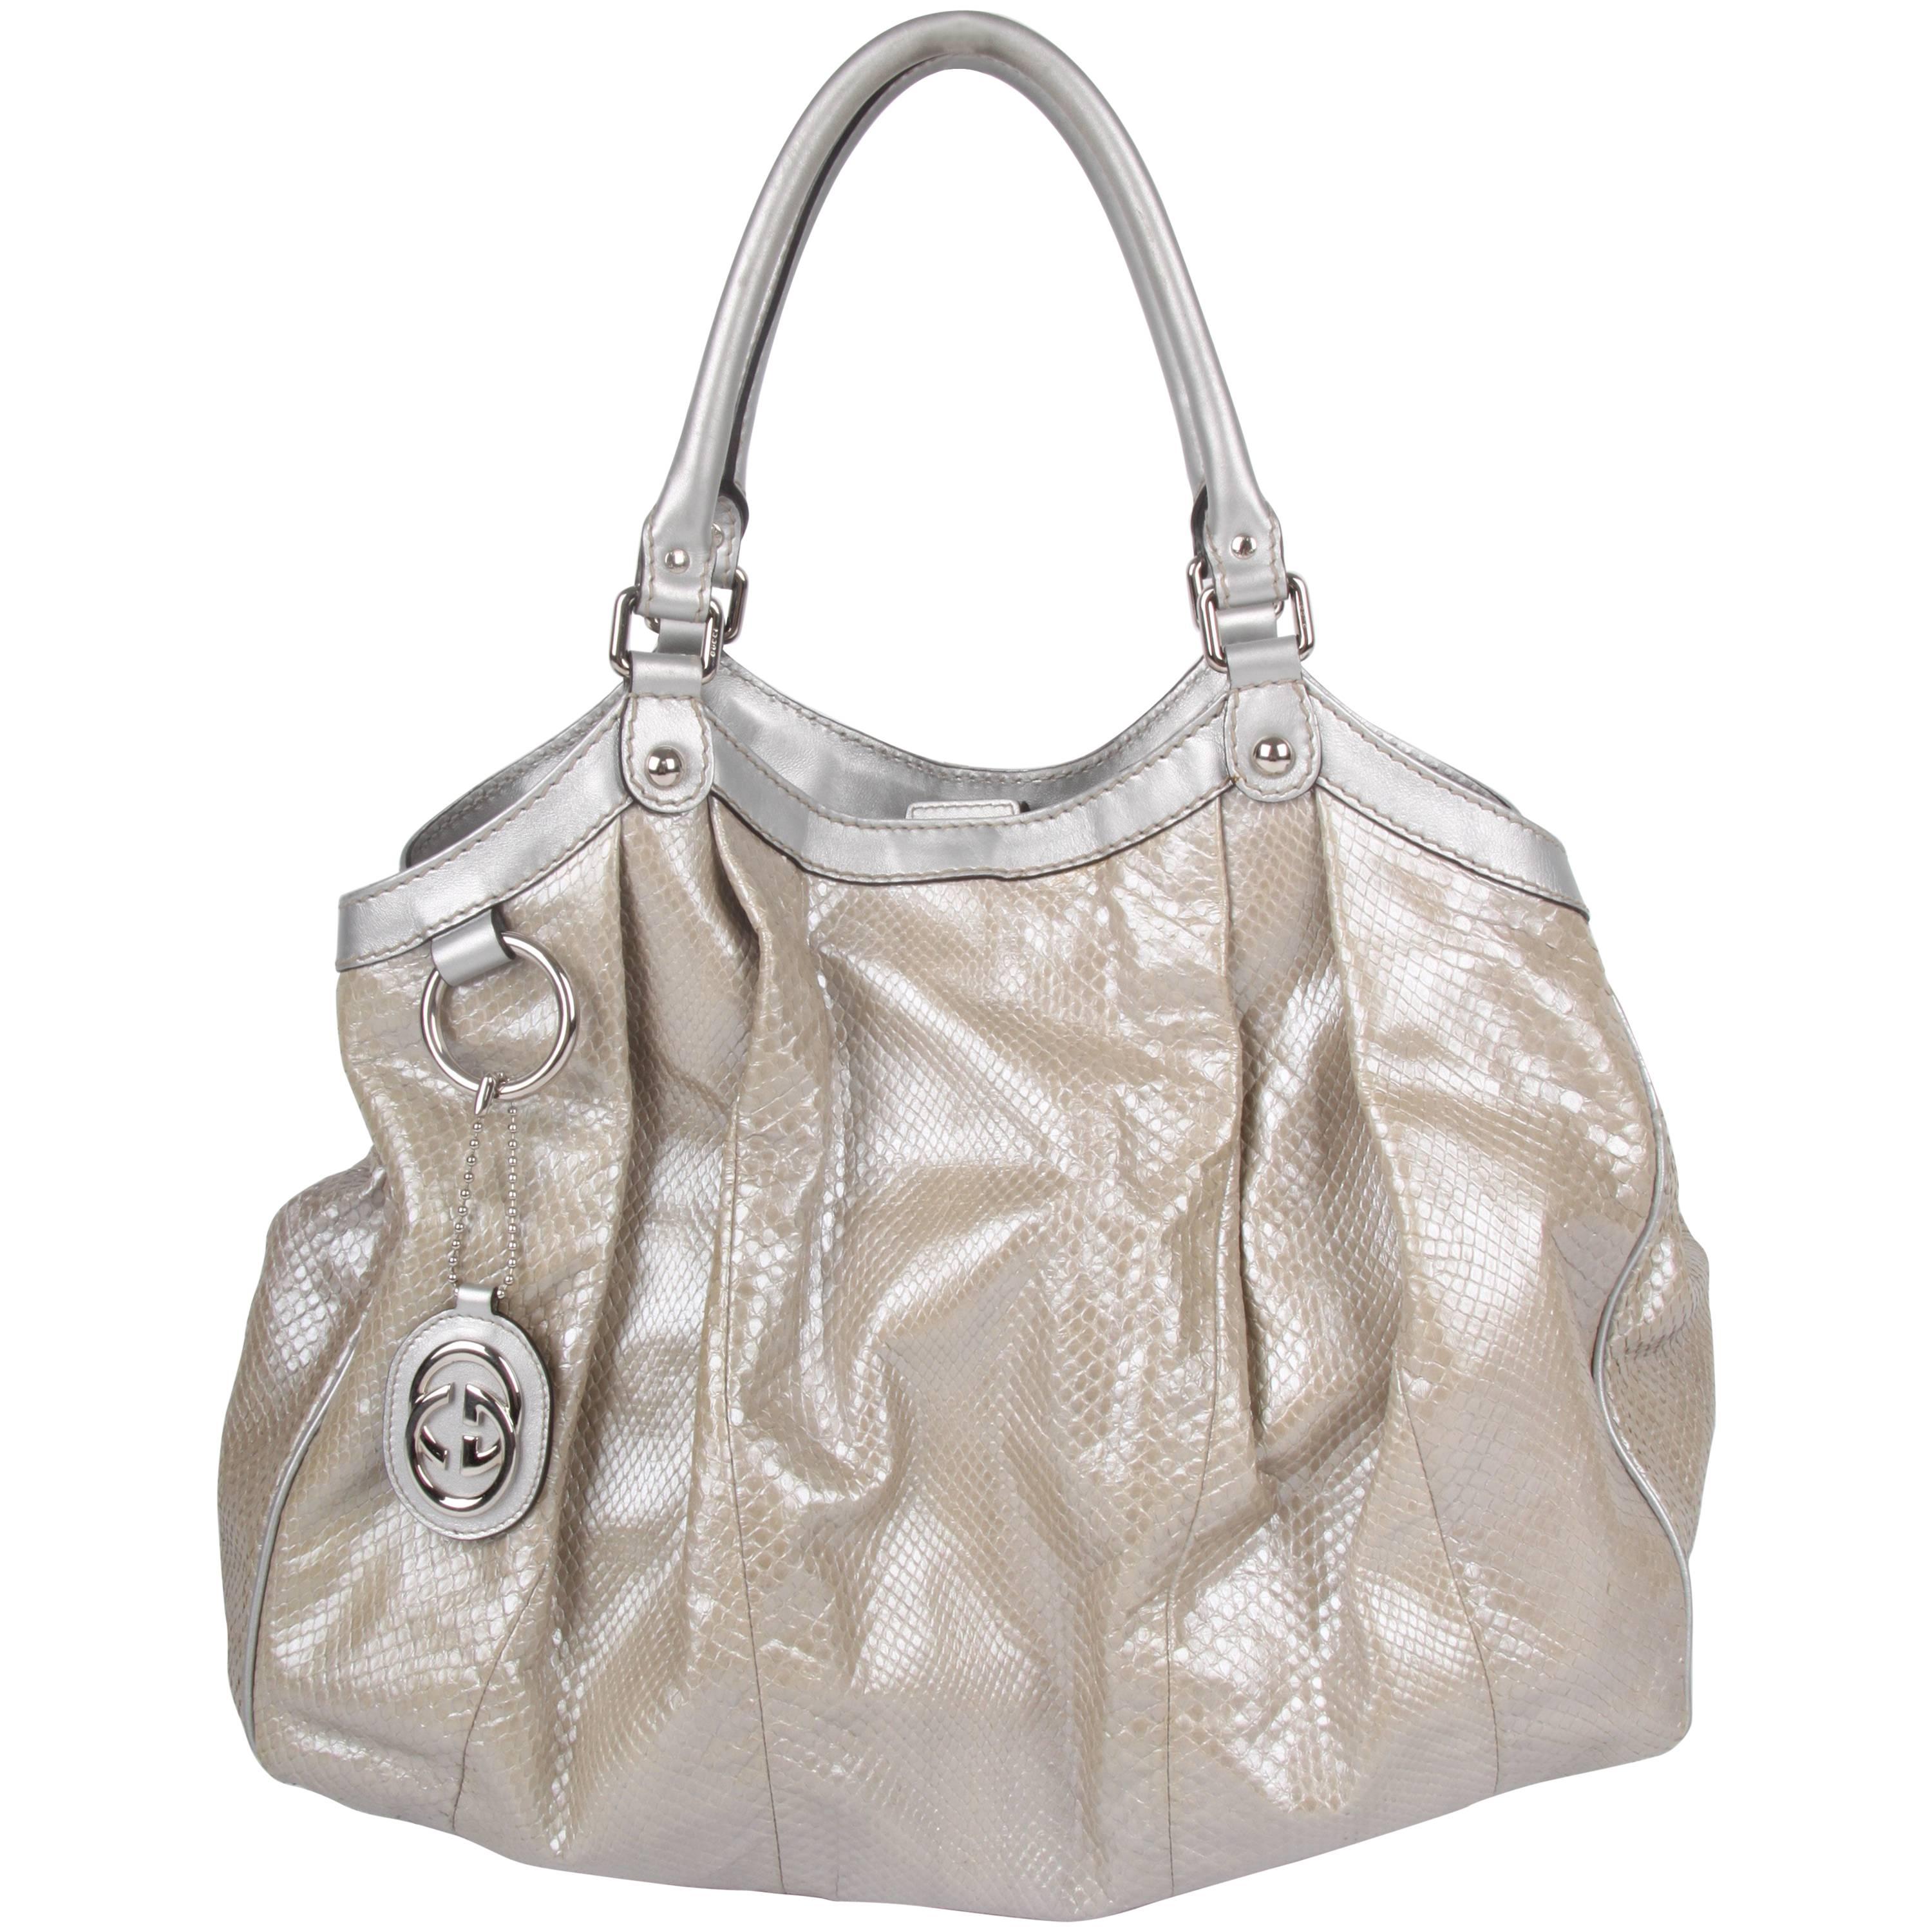 Gucci Sukey Tote Bag Python Large - silver For Sale